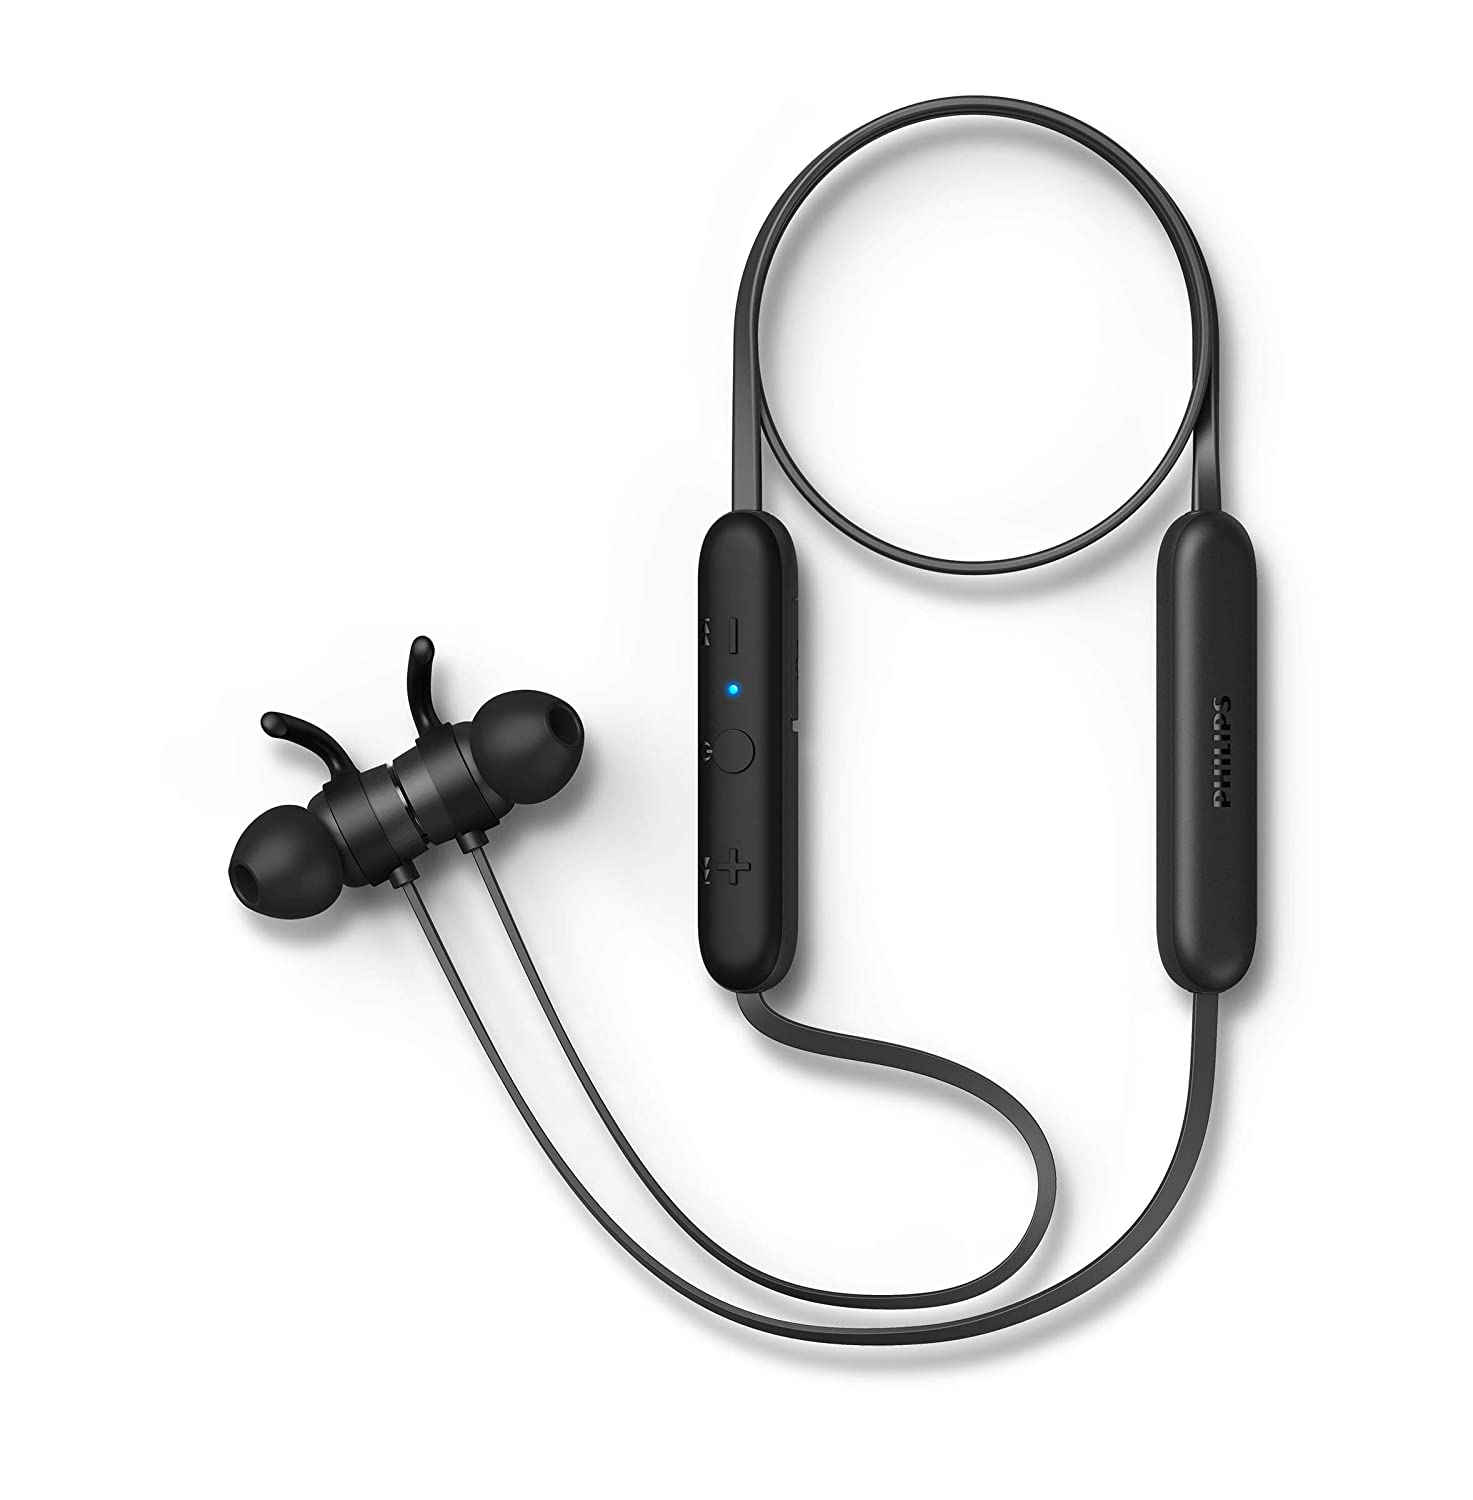 Philips Audio TAE1205BK/00 Bluetooth Neckband with 7 Hours of Playtime USB-C Type Quick Charge